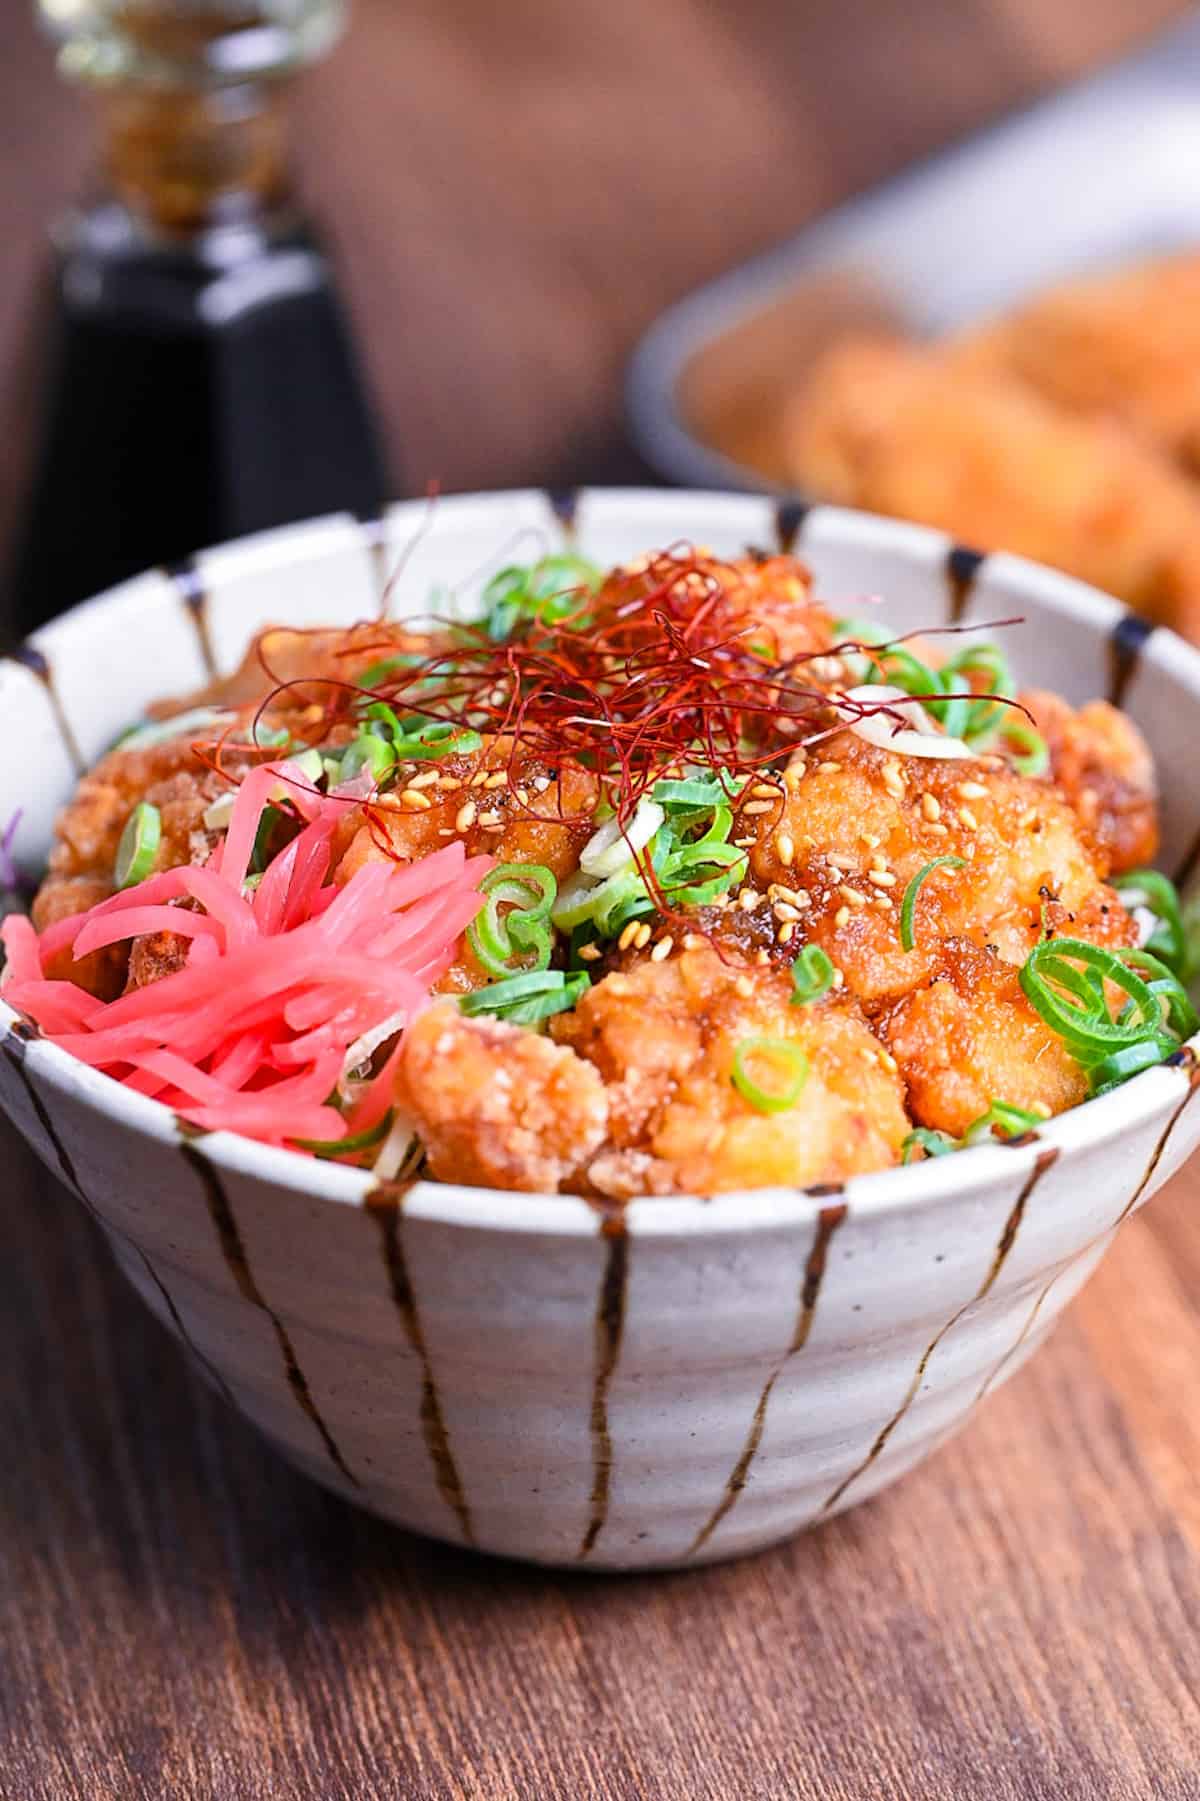 karaage don (Japanese fried chicken bowl) topped with sweet sauce, sesame seeds, chopped green onion, chili threads and pink pickled ginger.